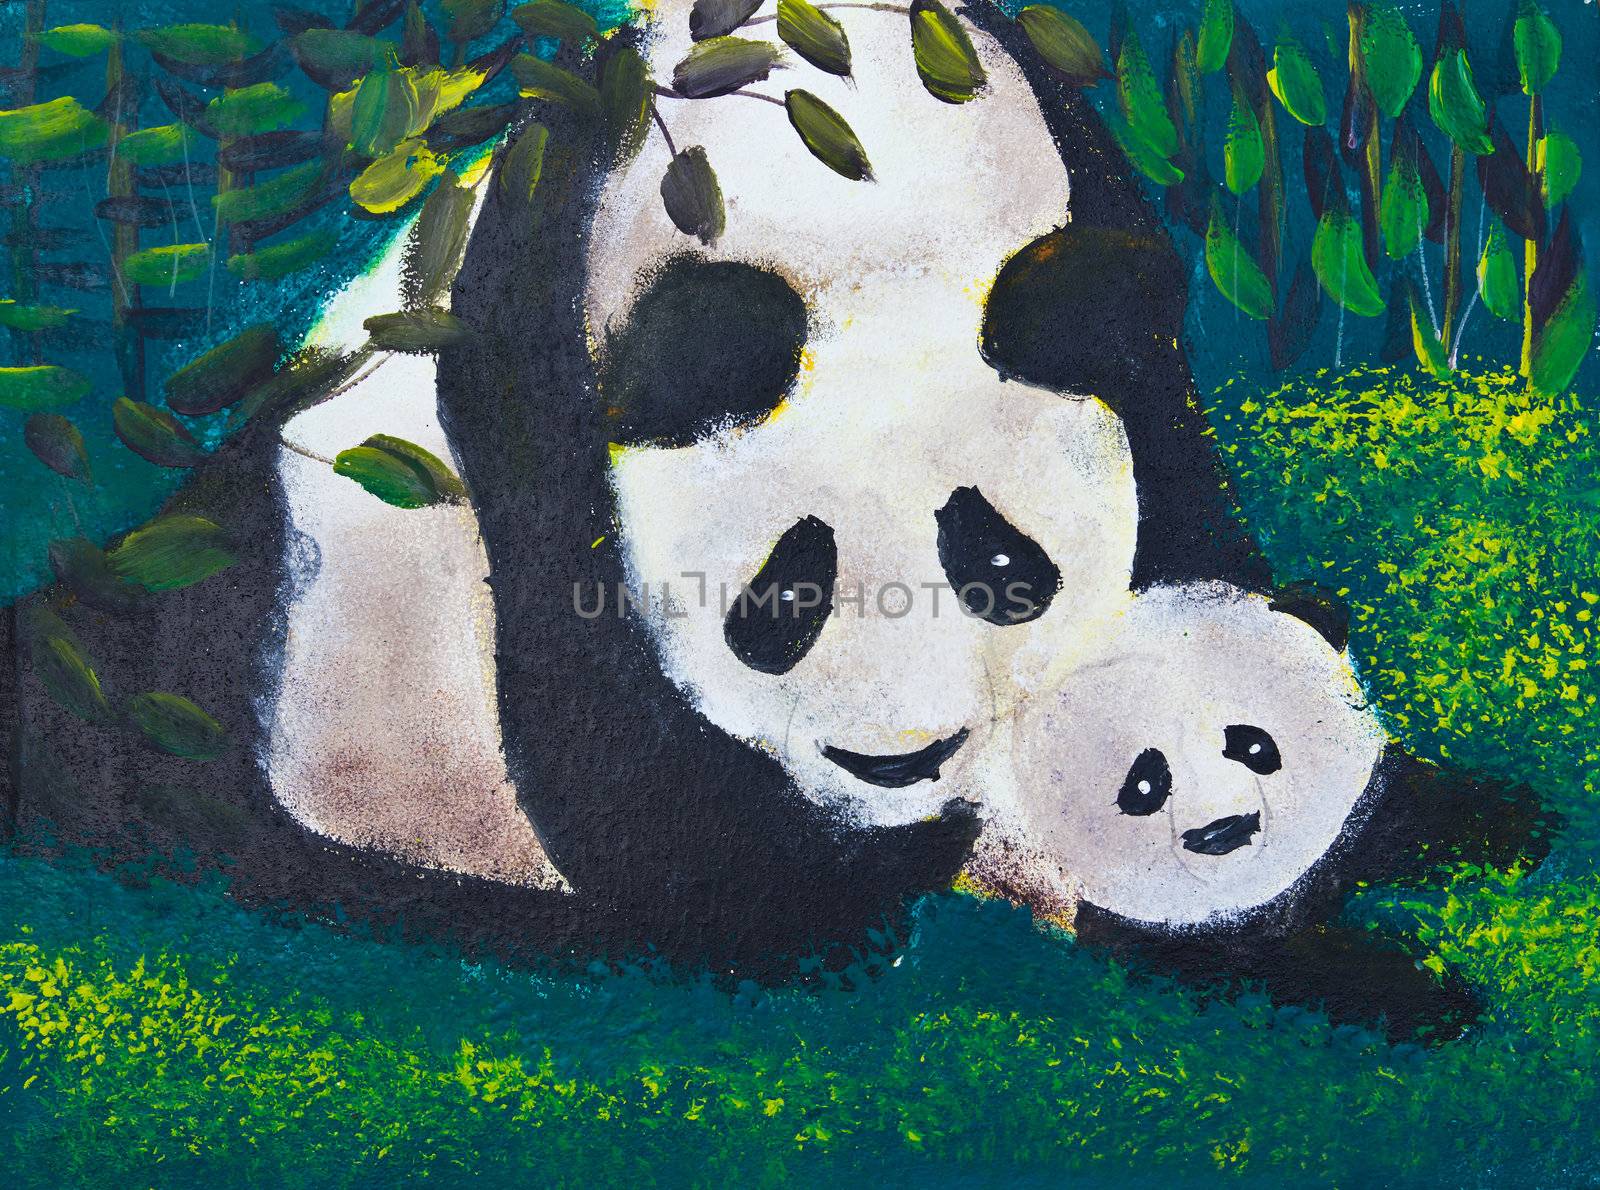 drawing of panda family by tungphoto